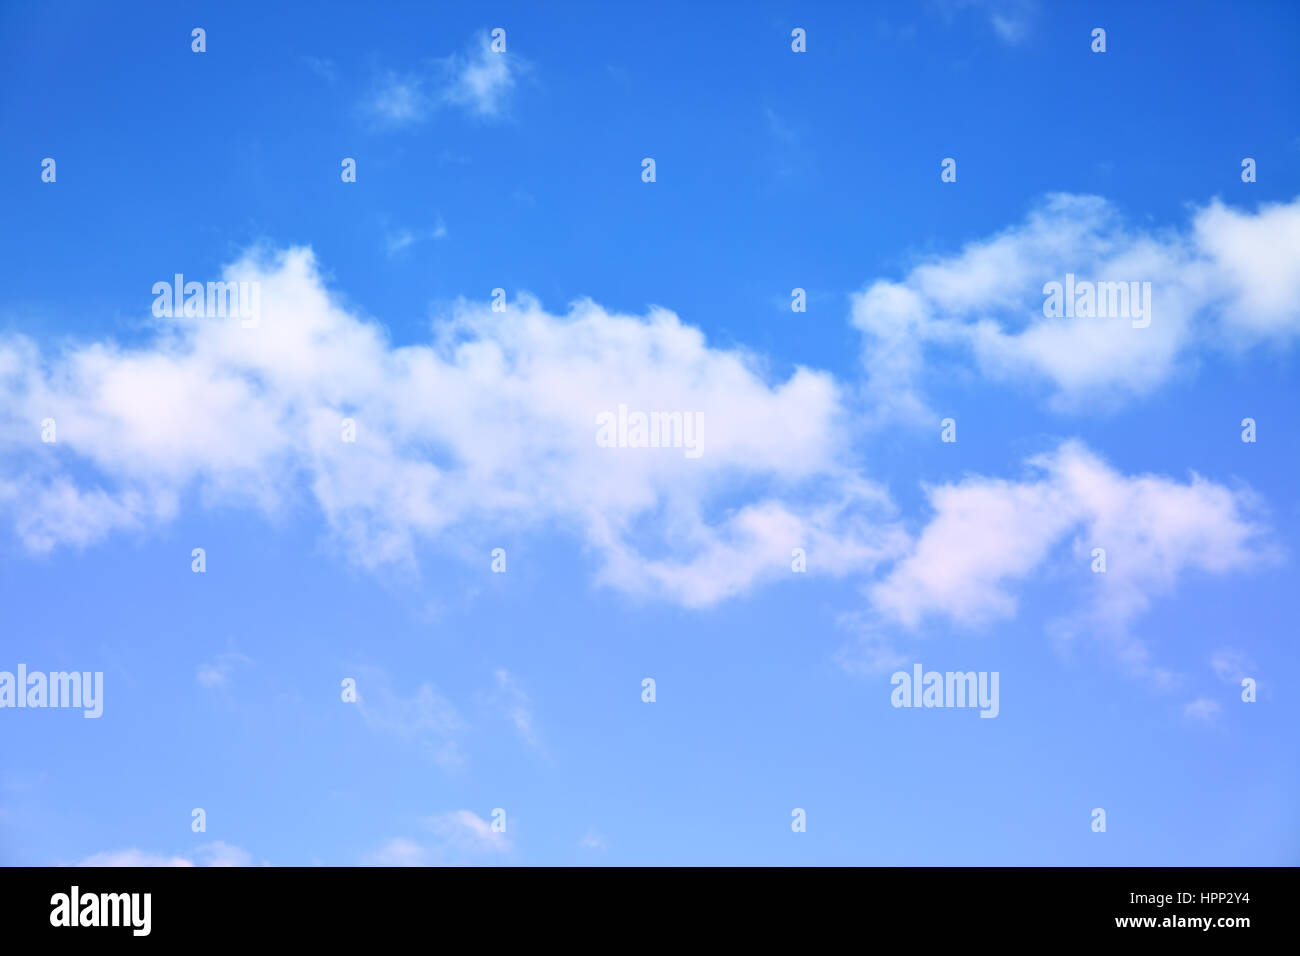 Line of clouds in the sky - space for your own text Stock Photo